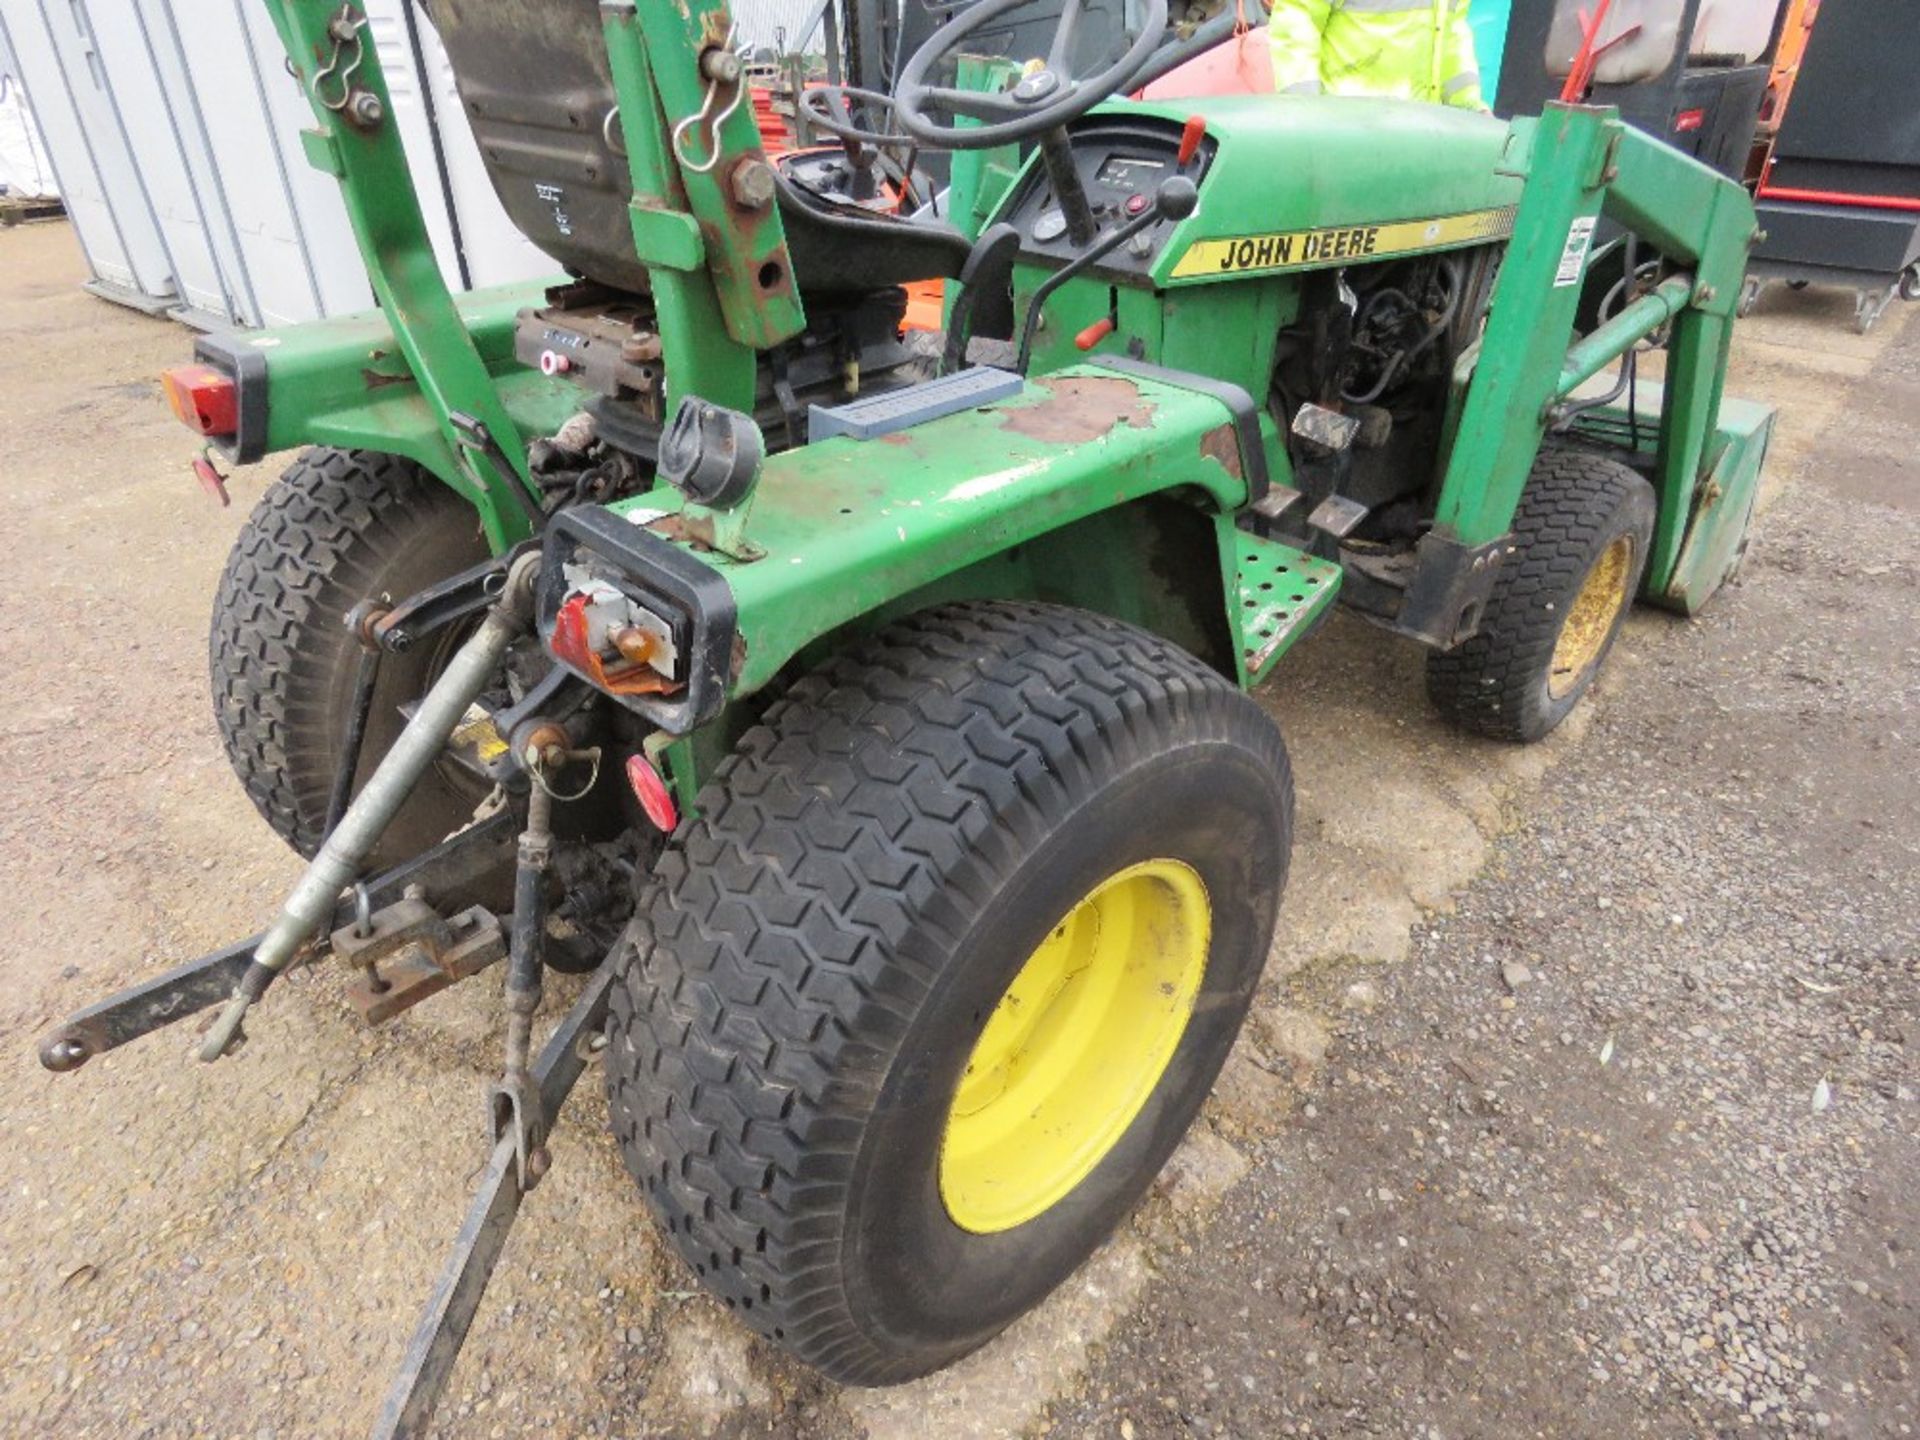 JOHN DEERE 855 4WD COMPACT TRACTOR WITH FOREND LOADER. WHEN TESTED WAS SEEN TO TURN OVER BUT NOT STA - Image 3 of 8